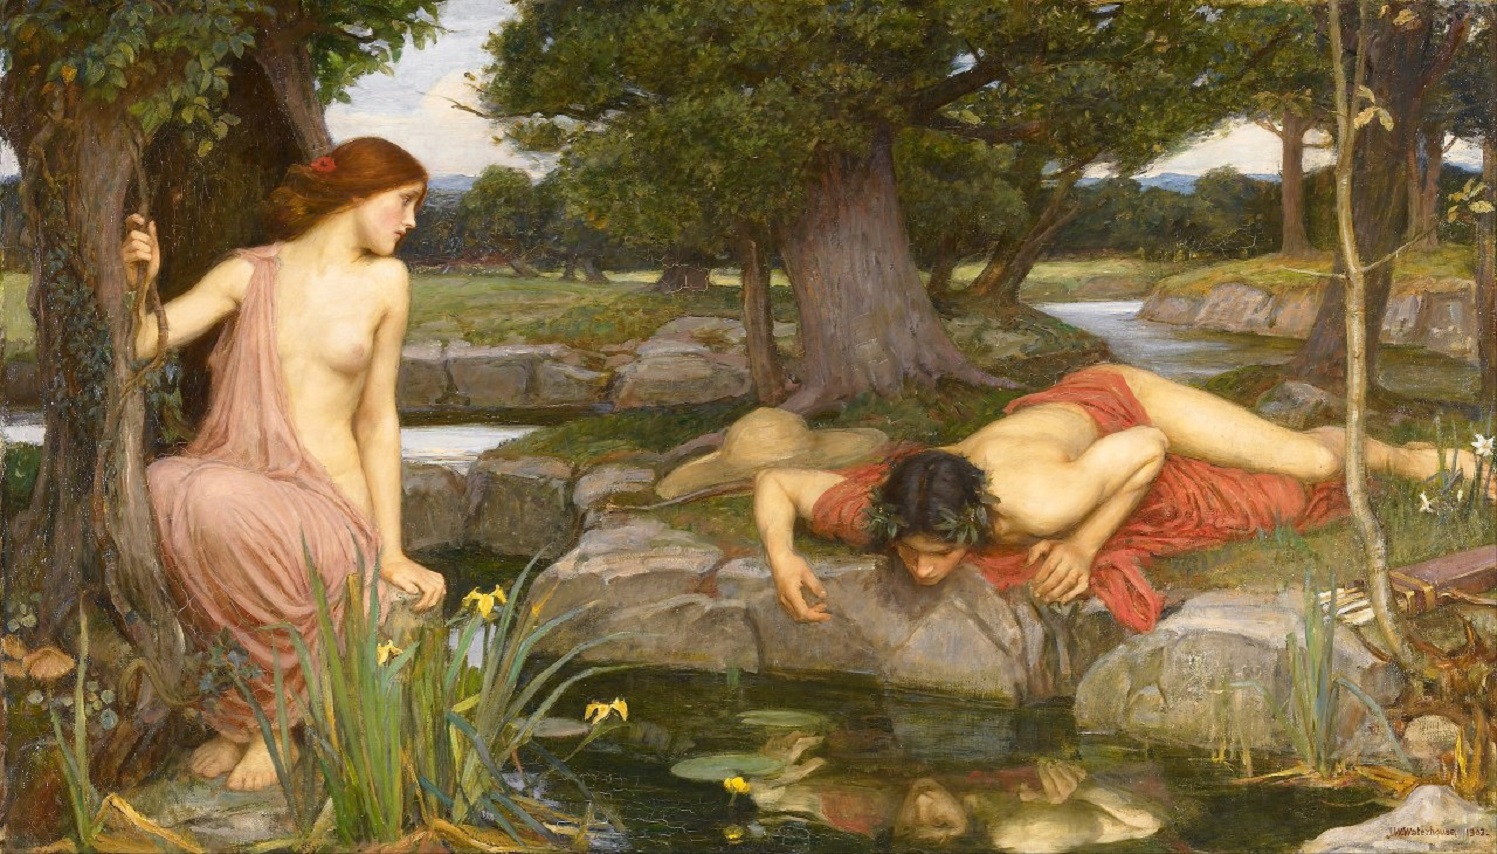 john_william_waterhouse_echo_and_narcissus_1903_szingy_gallery.jpg